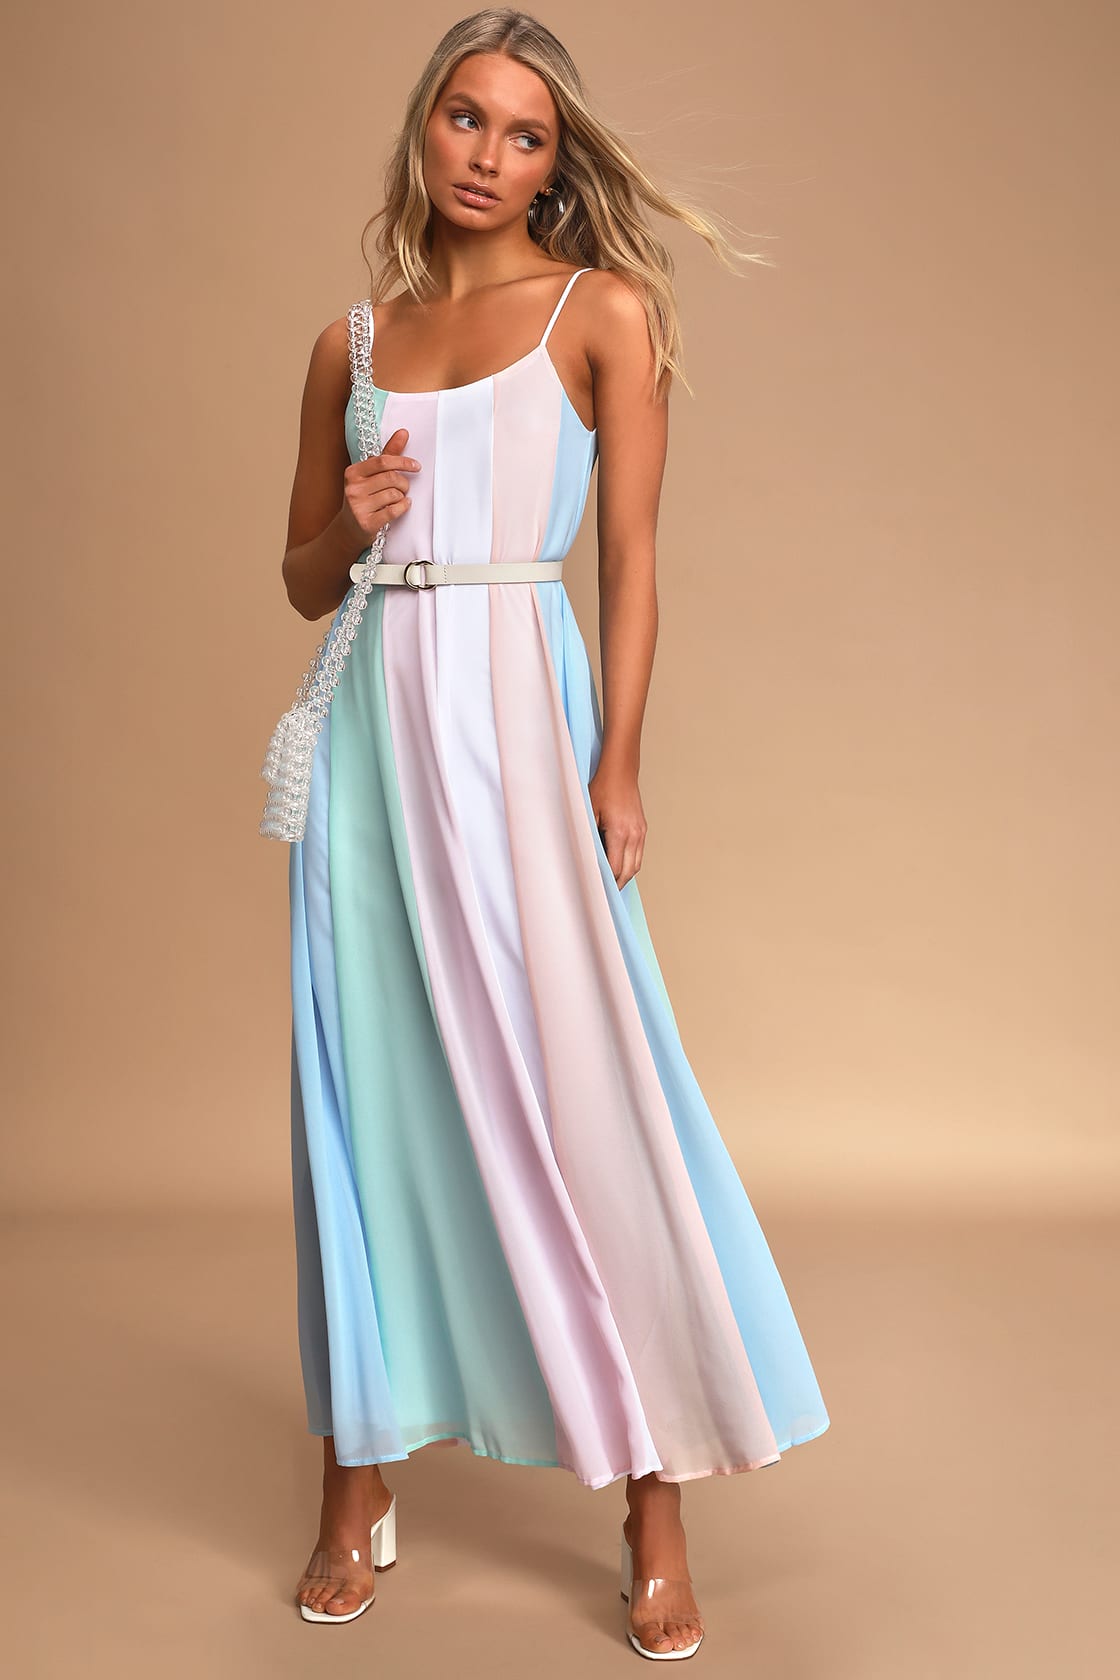 Light Pastel Colored Maxi Dress for Greece Vacation Outfit